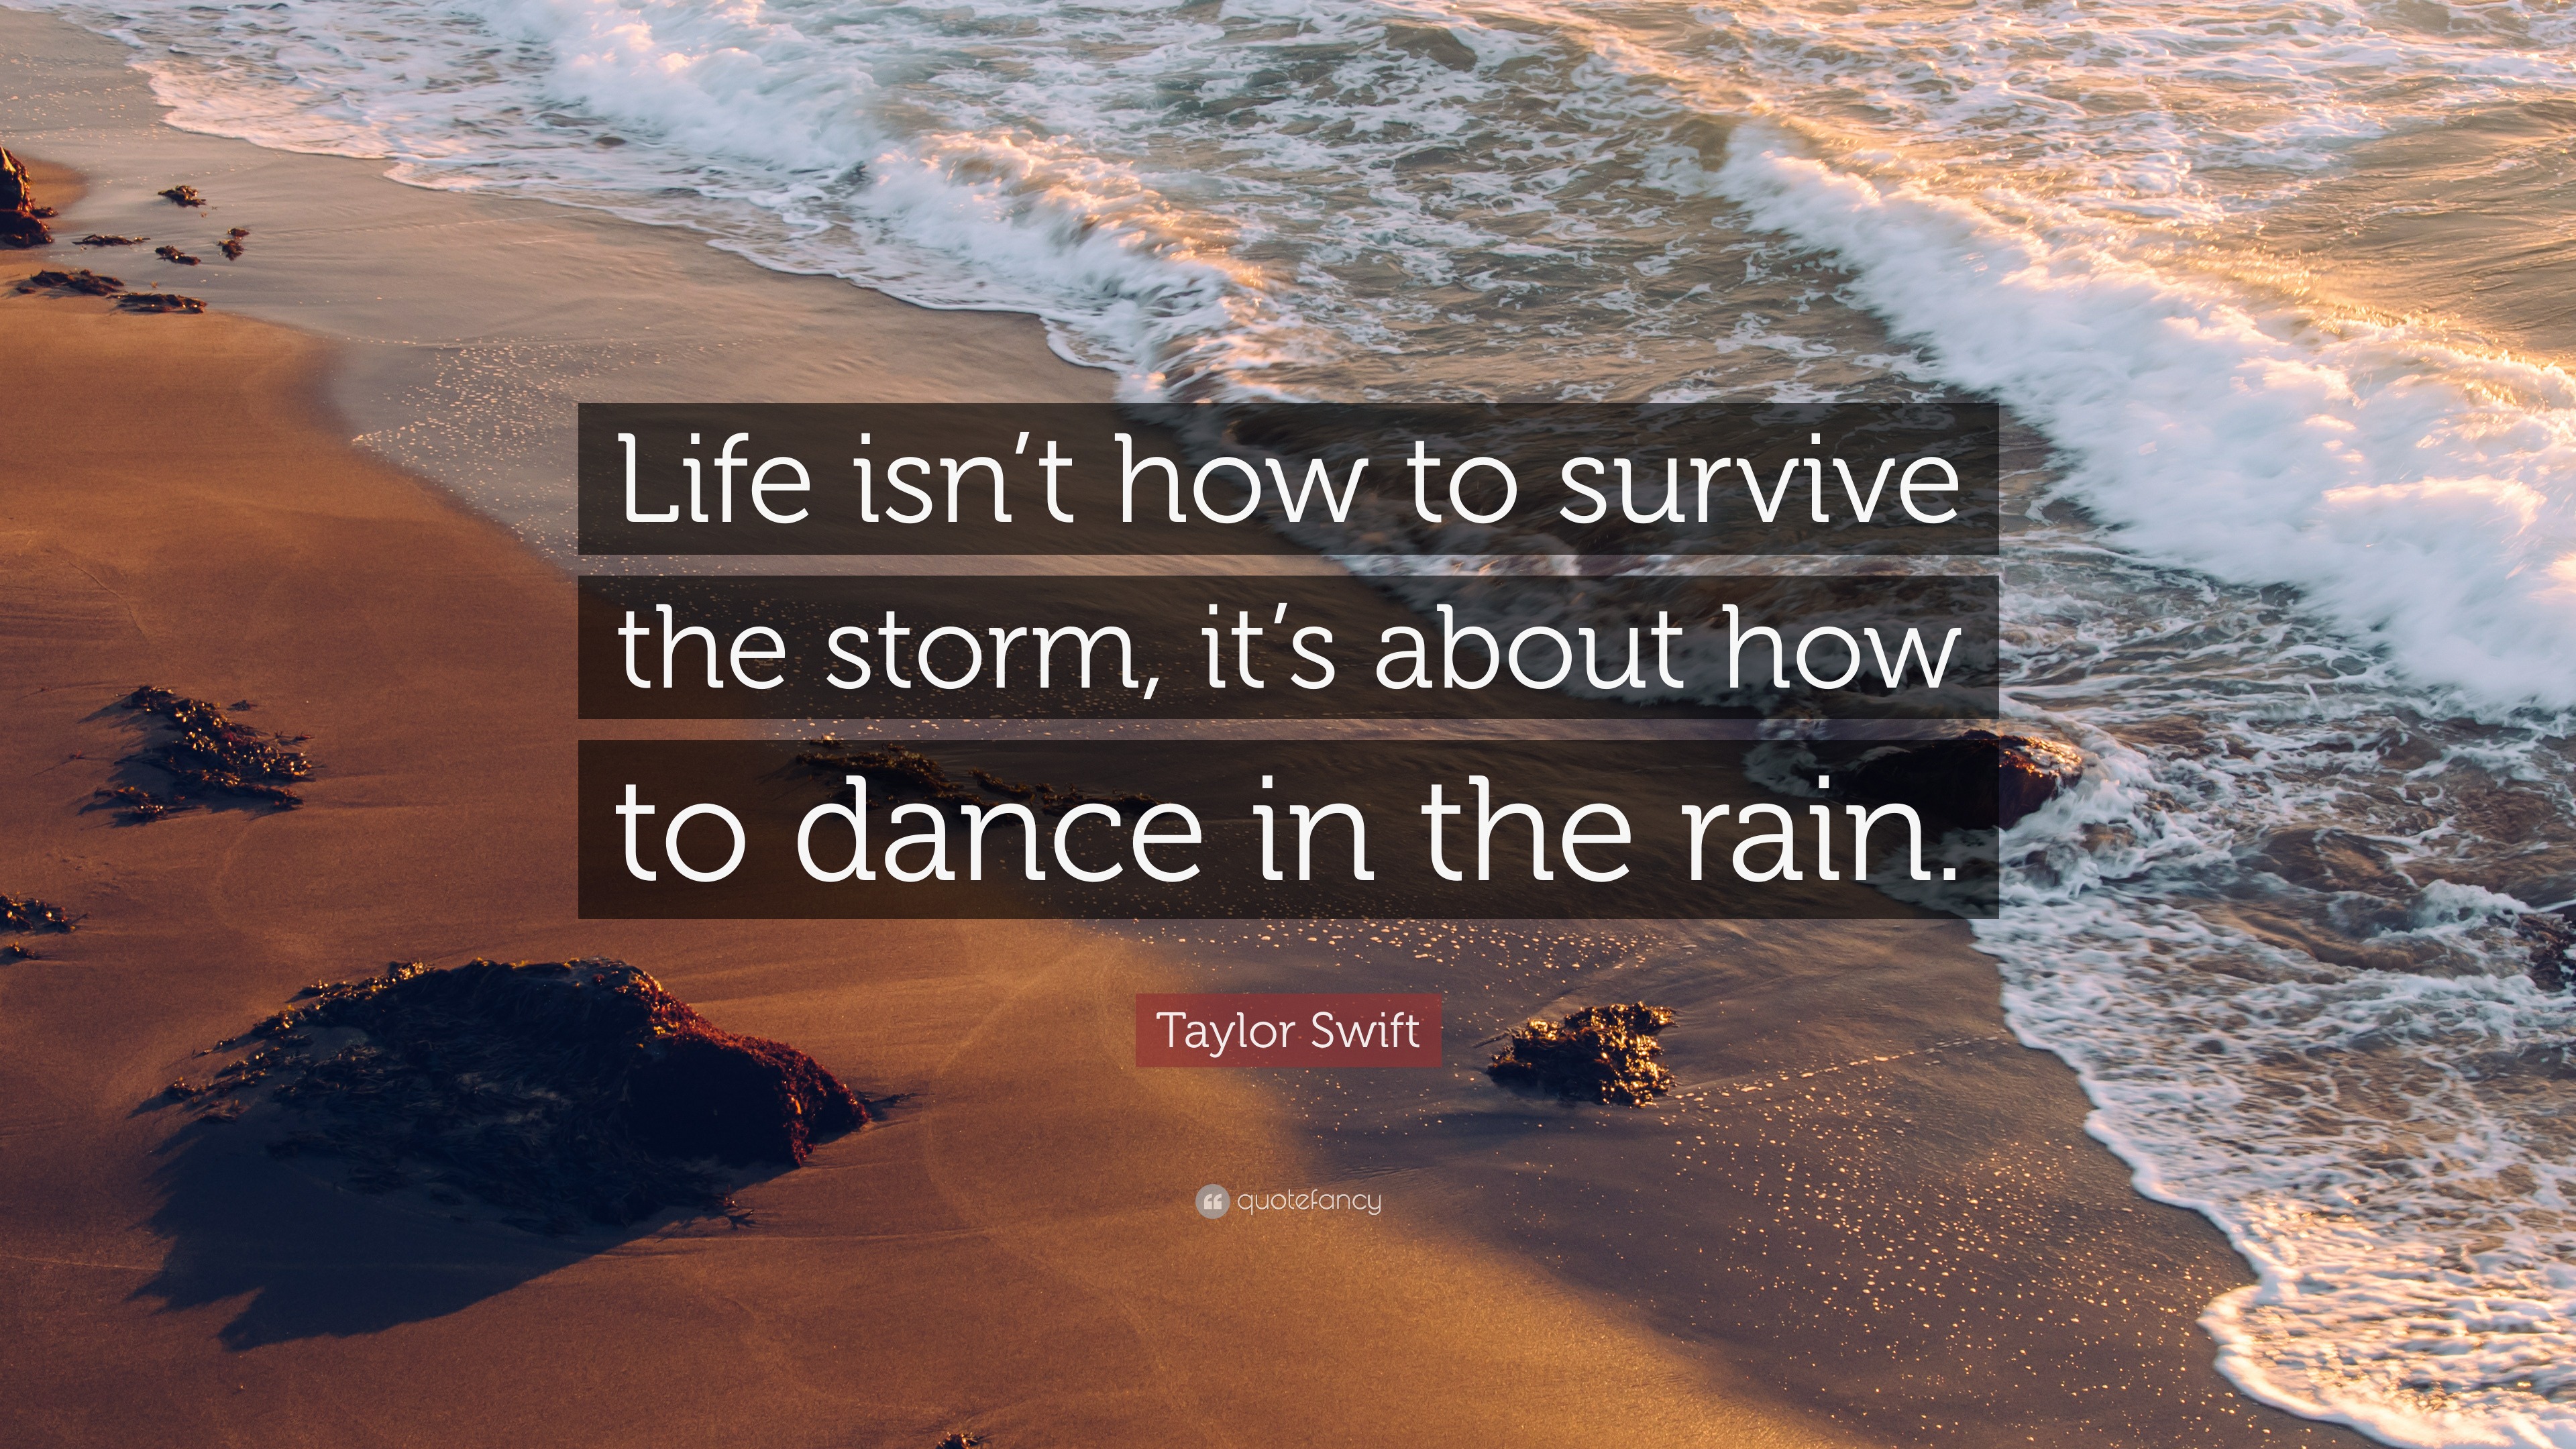 Taylor Swift Quote: “Life isn’t how to survive the storm, it’s about